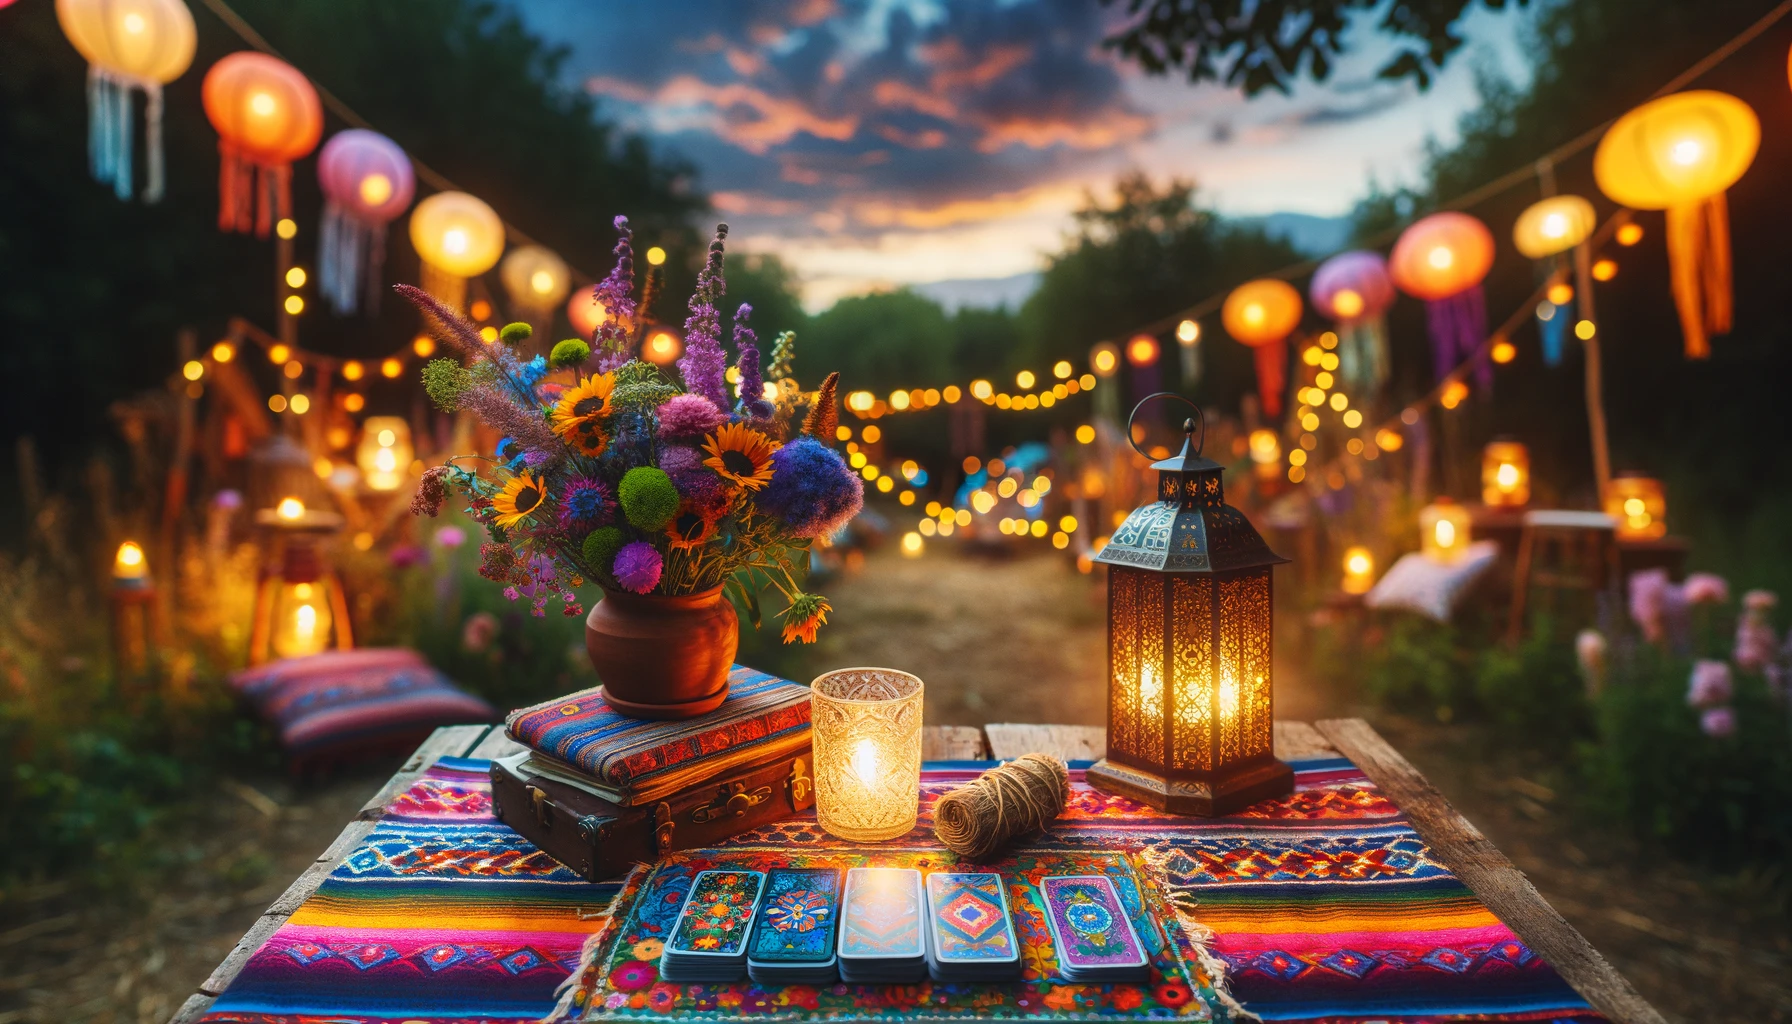 A vibrant and colorful outdoor setting under a twilight sky, featuring a rustic wooden table adorned with a brightly patterned cloth